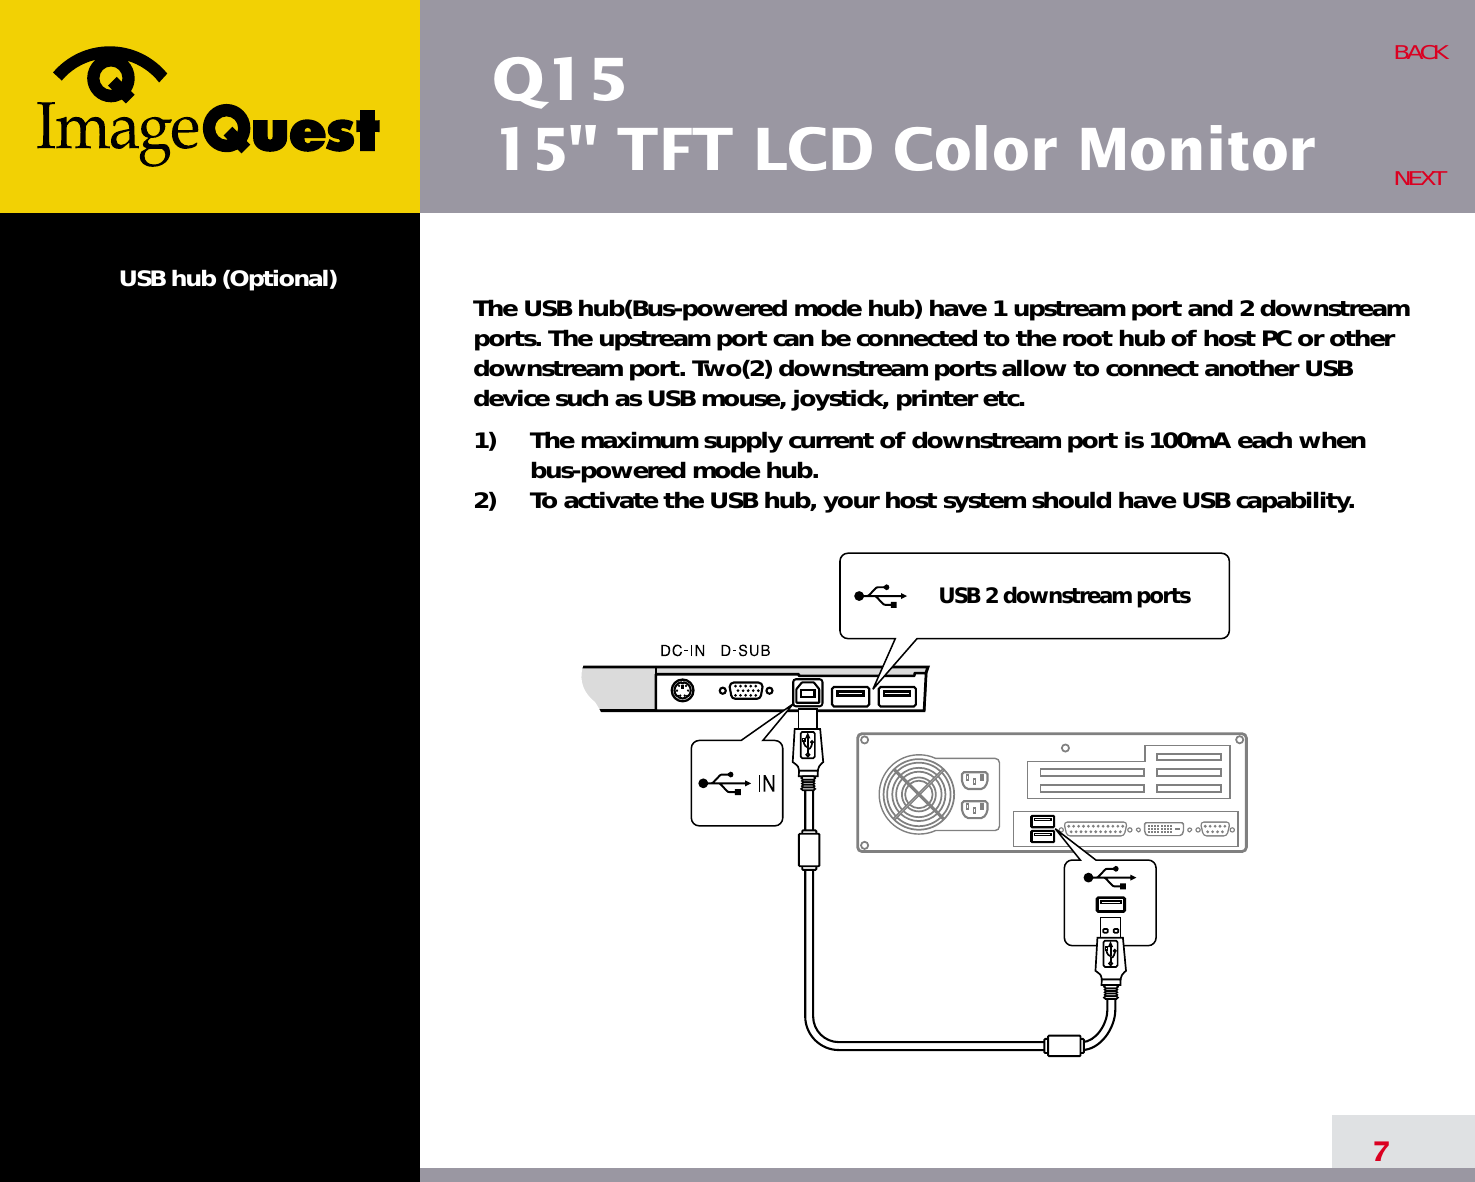 Q1515&quot; TFT LCD Color MonitorUSB hub (Optional)The USB hub(Bus-powered mode hub) have 1 upstream port and 2 downstreamports. The upstream port can be connected to the root hub of host PC or otherdownstream port. Two(2) downstream ports allow to connect another USBdevice such as USB mouse, joystick, printer etc.1)     The maximum supply current of downstream port is 100mA each whenbus-powered mode hub.2)     To activate the USB hub, your host system should have USB capability.7BACKNEXTUSB 2 downstream ports